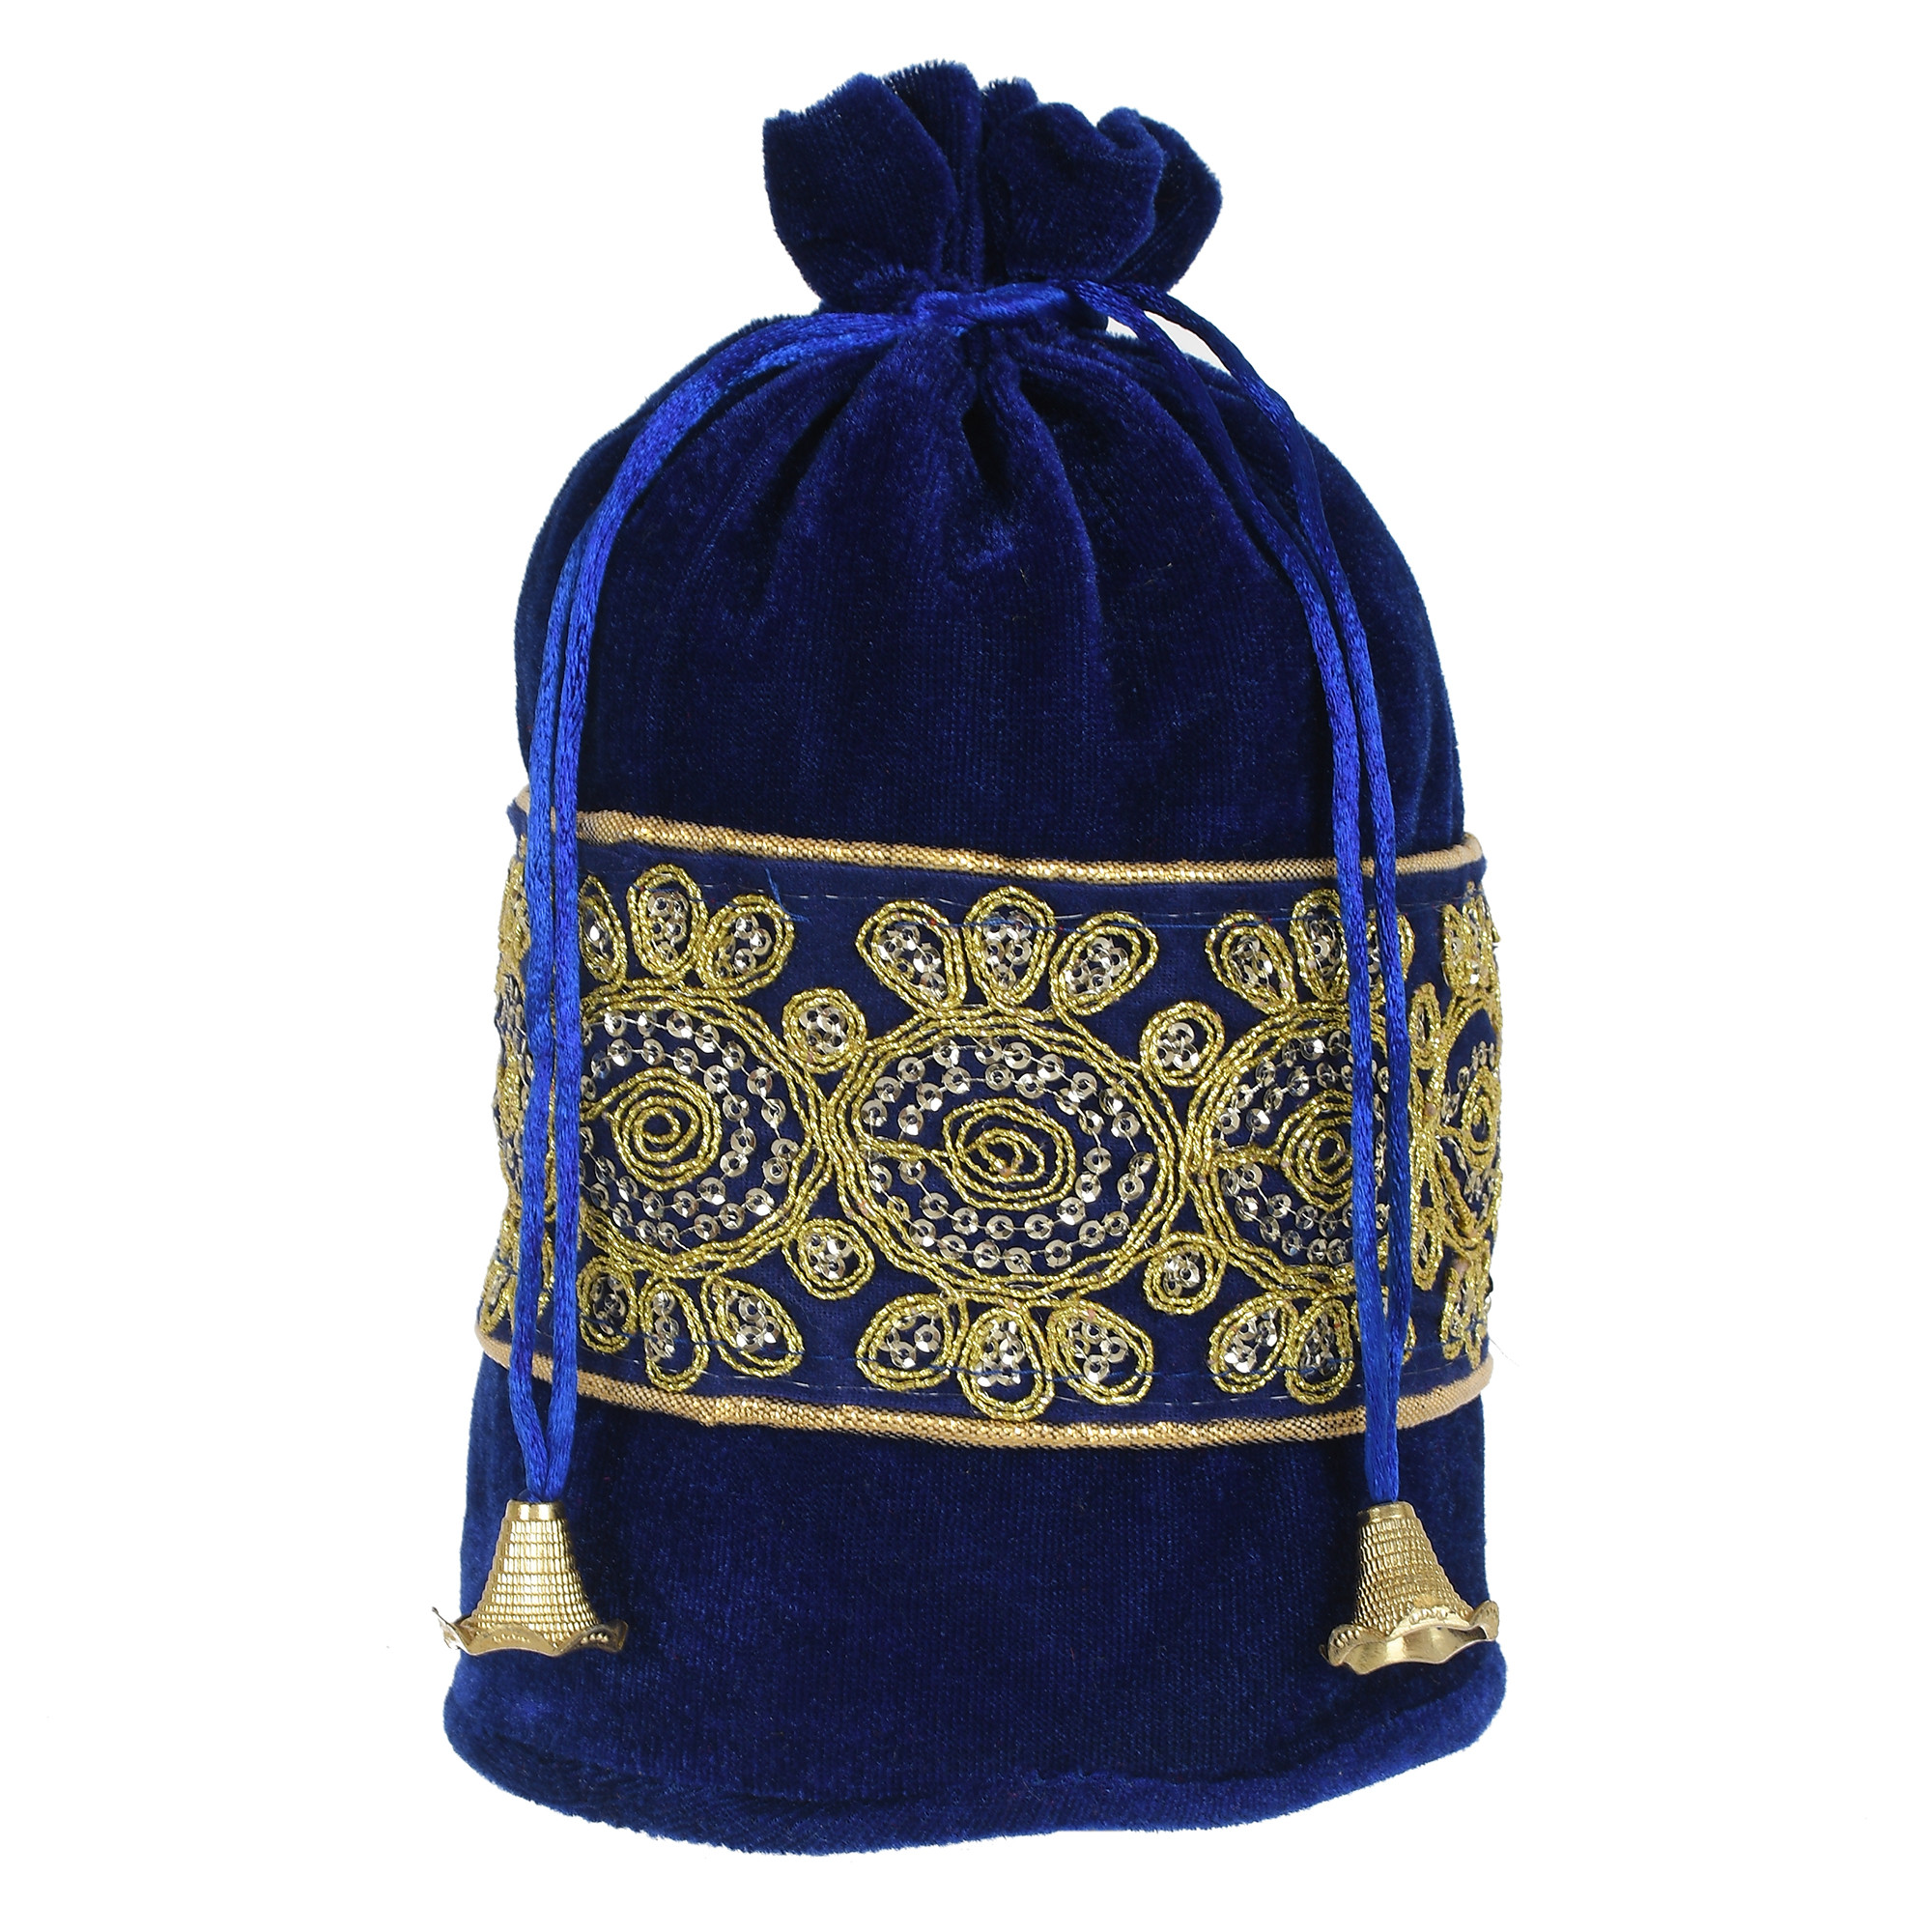 Kuber Industries Embroidered Design Drawstring Potli Bag Party Wedding Favor Gift Jewelry Bags-(Red & Blue & Orange)